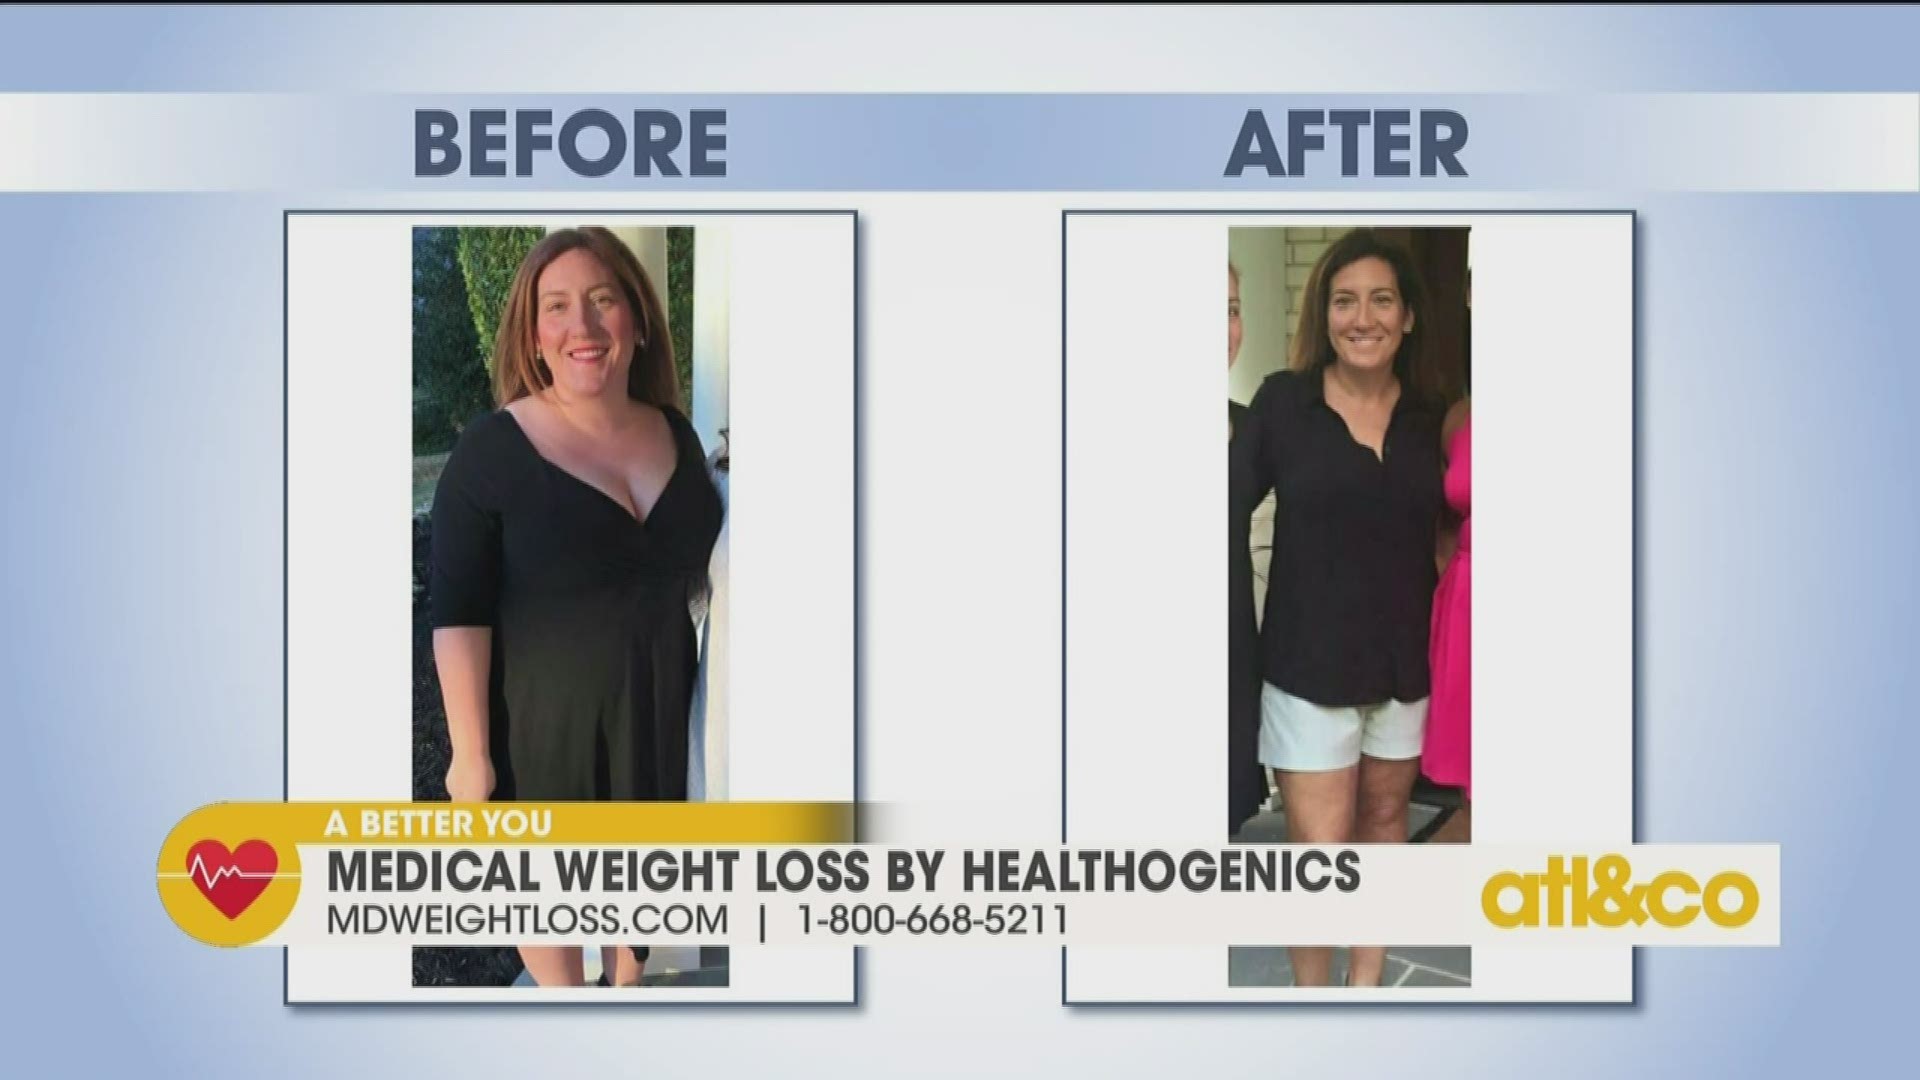 Get an exclusive offer from Medical Weight Loss by Healthogenics on 'Atlanta & Company'